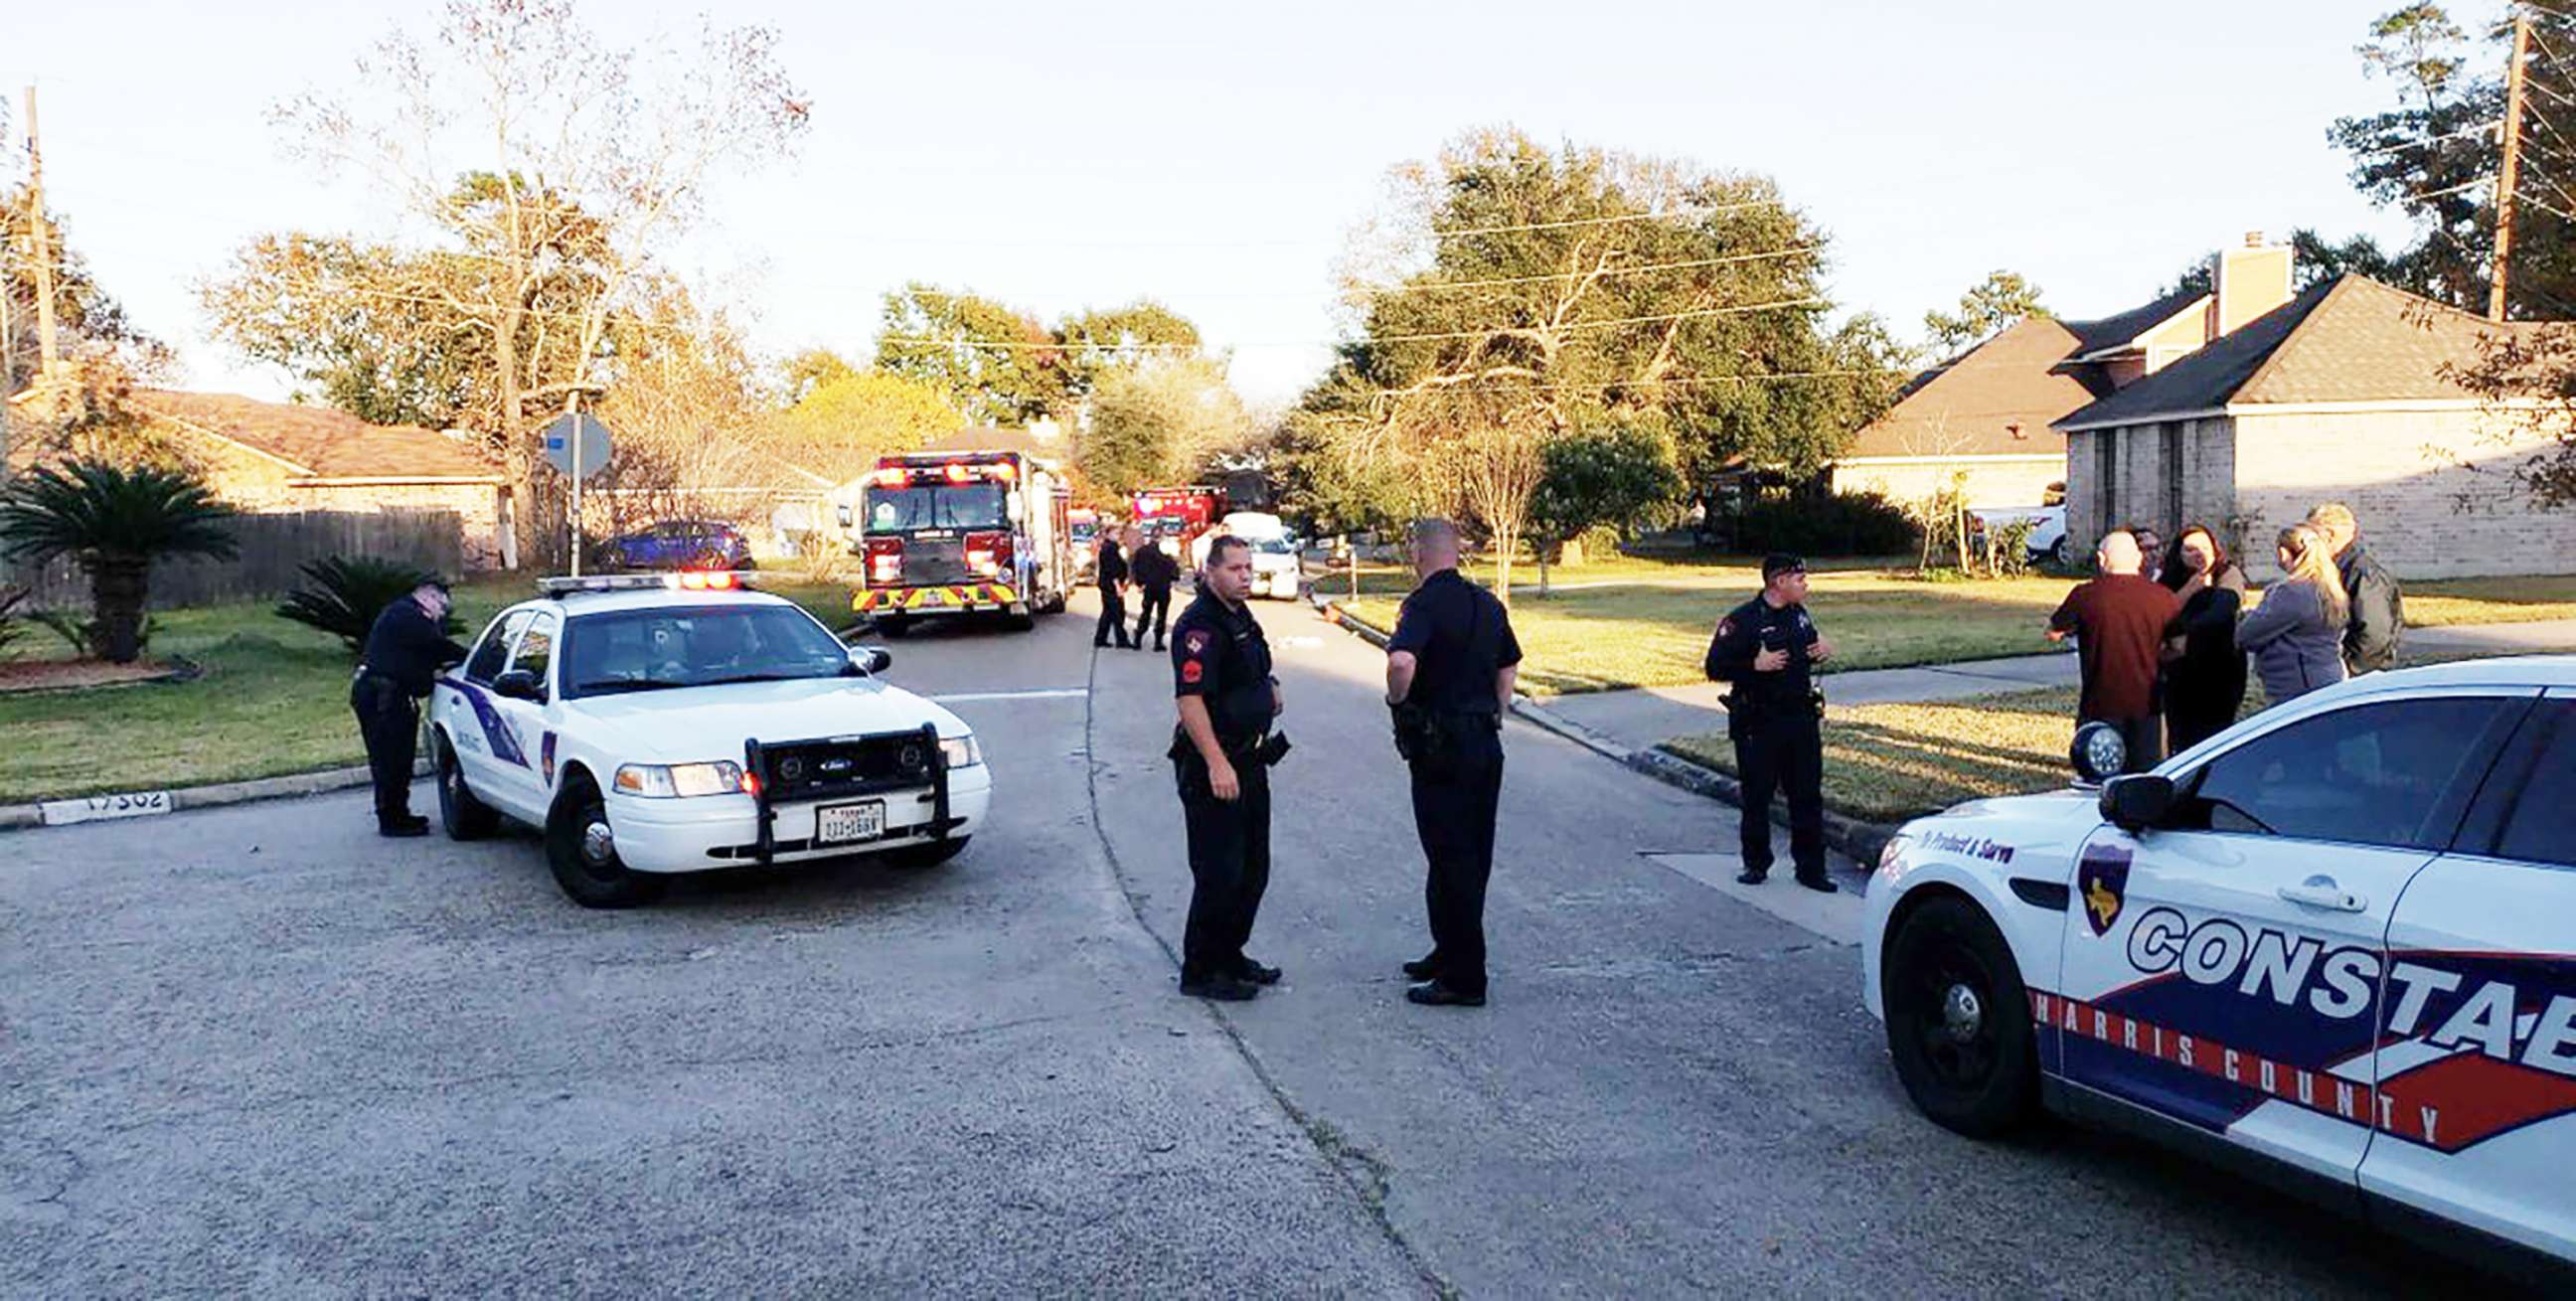 PHOTO: Police respond to the scene of an apparent self-inflicted gunshot injury in Texas.